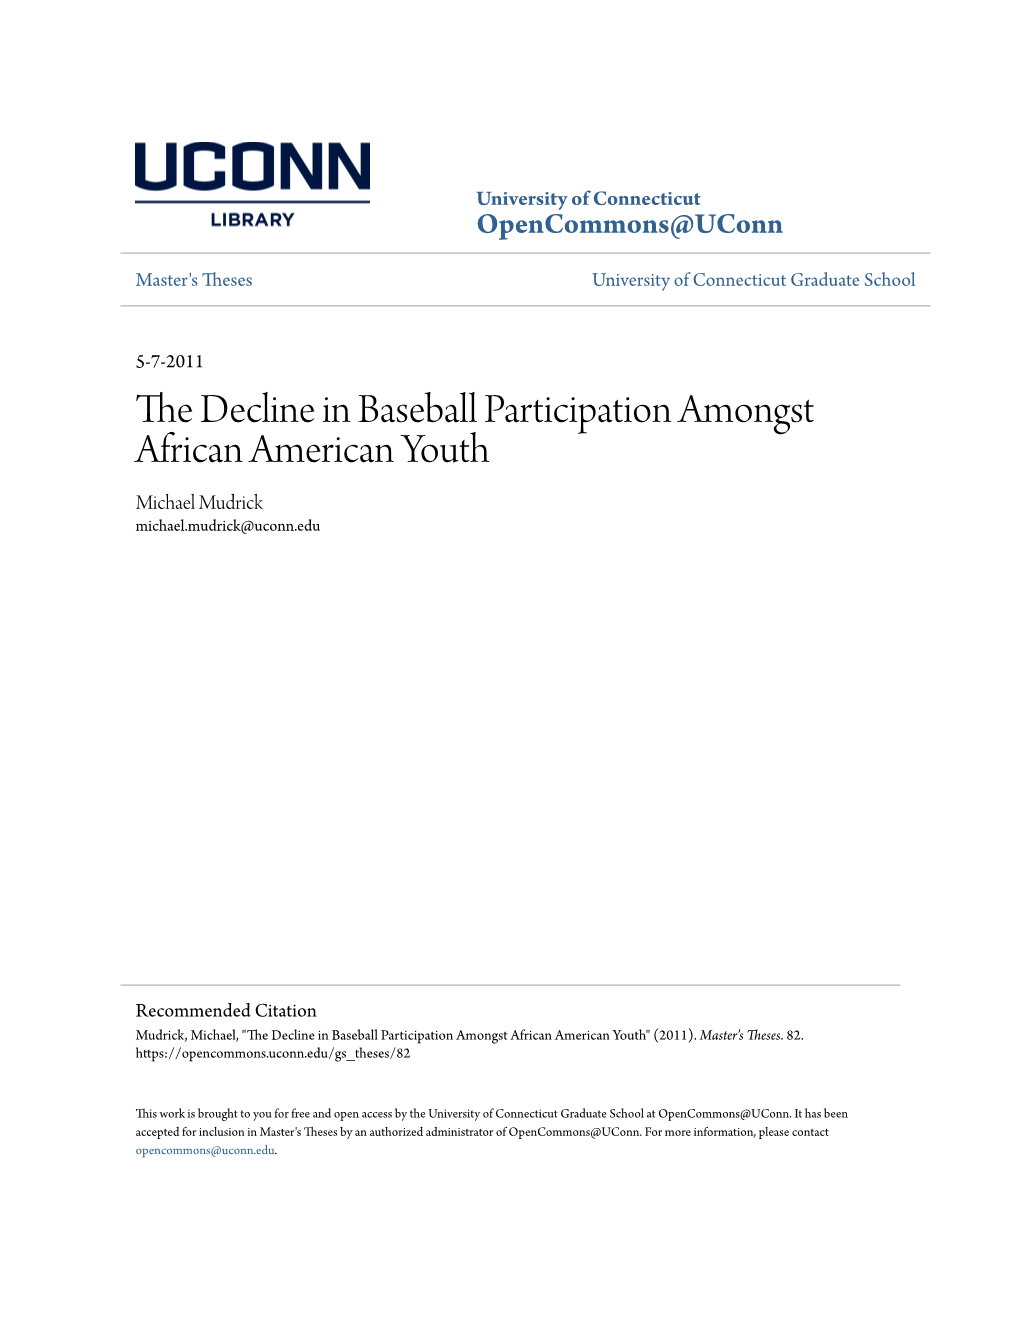 The Decline in Baseball Participation Amongst African American Youth 1